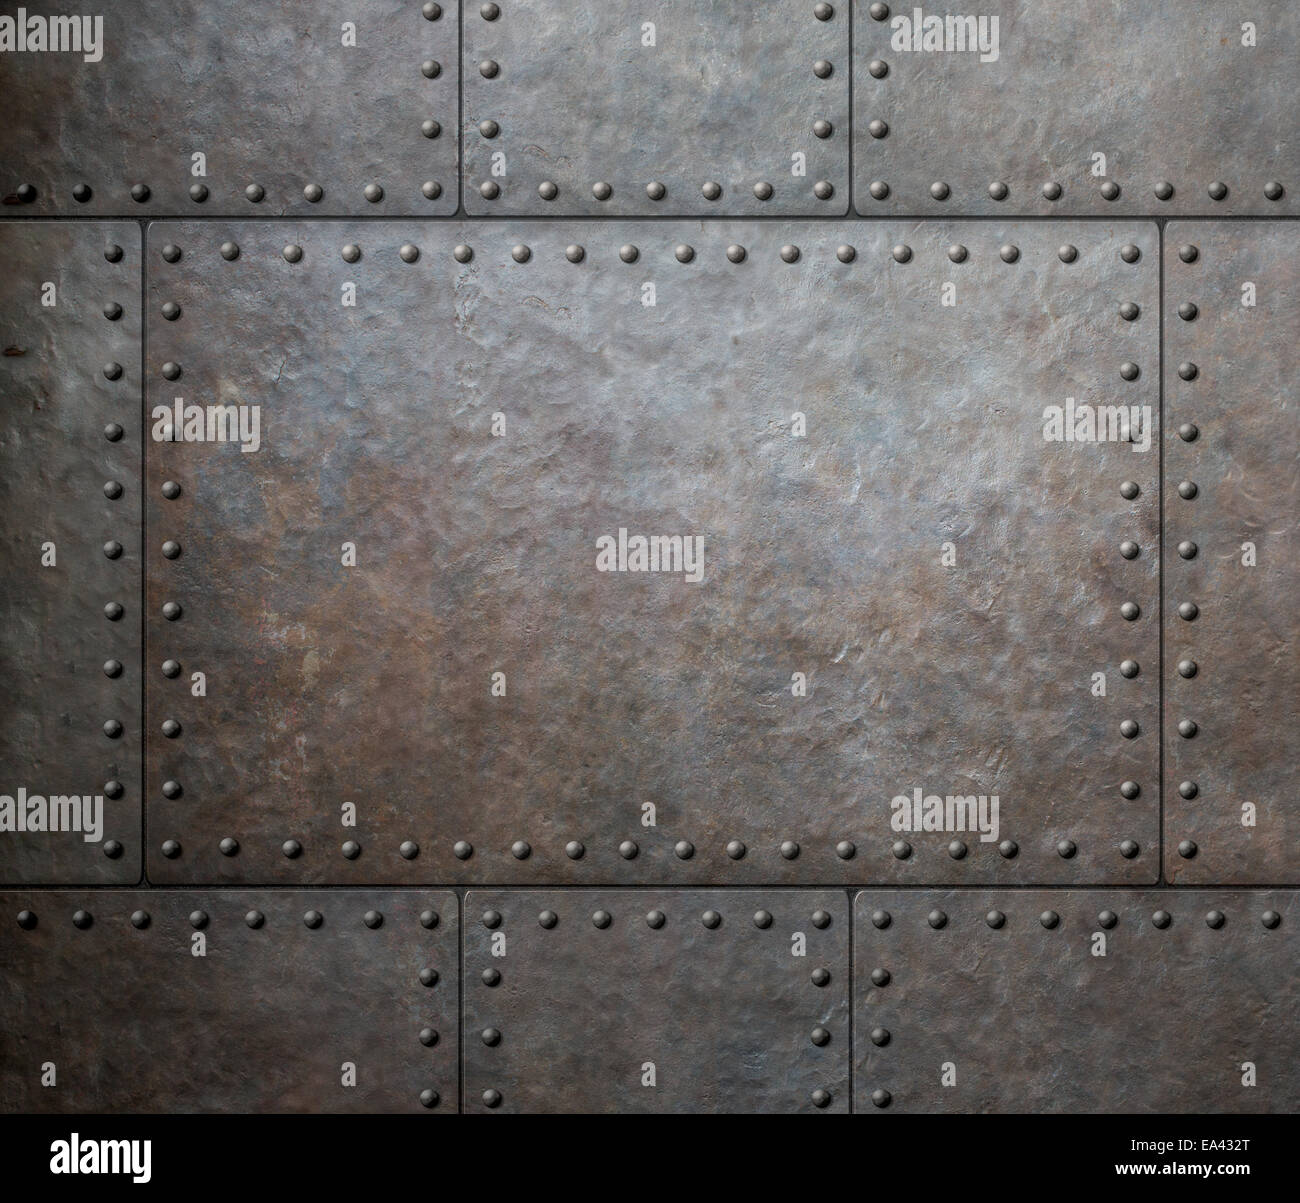 metal texture with rivets as steam punk background or texture Stock Photo